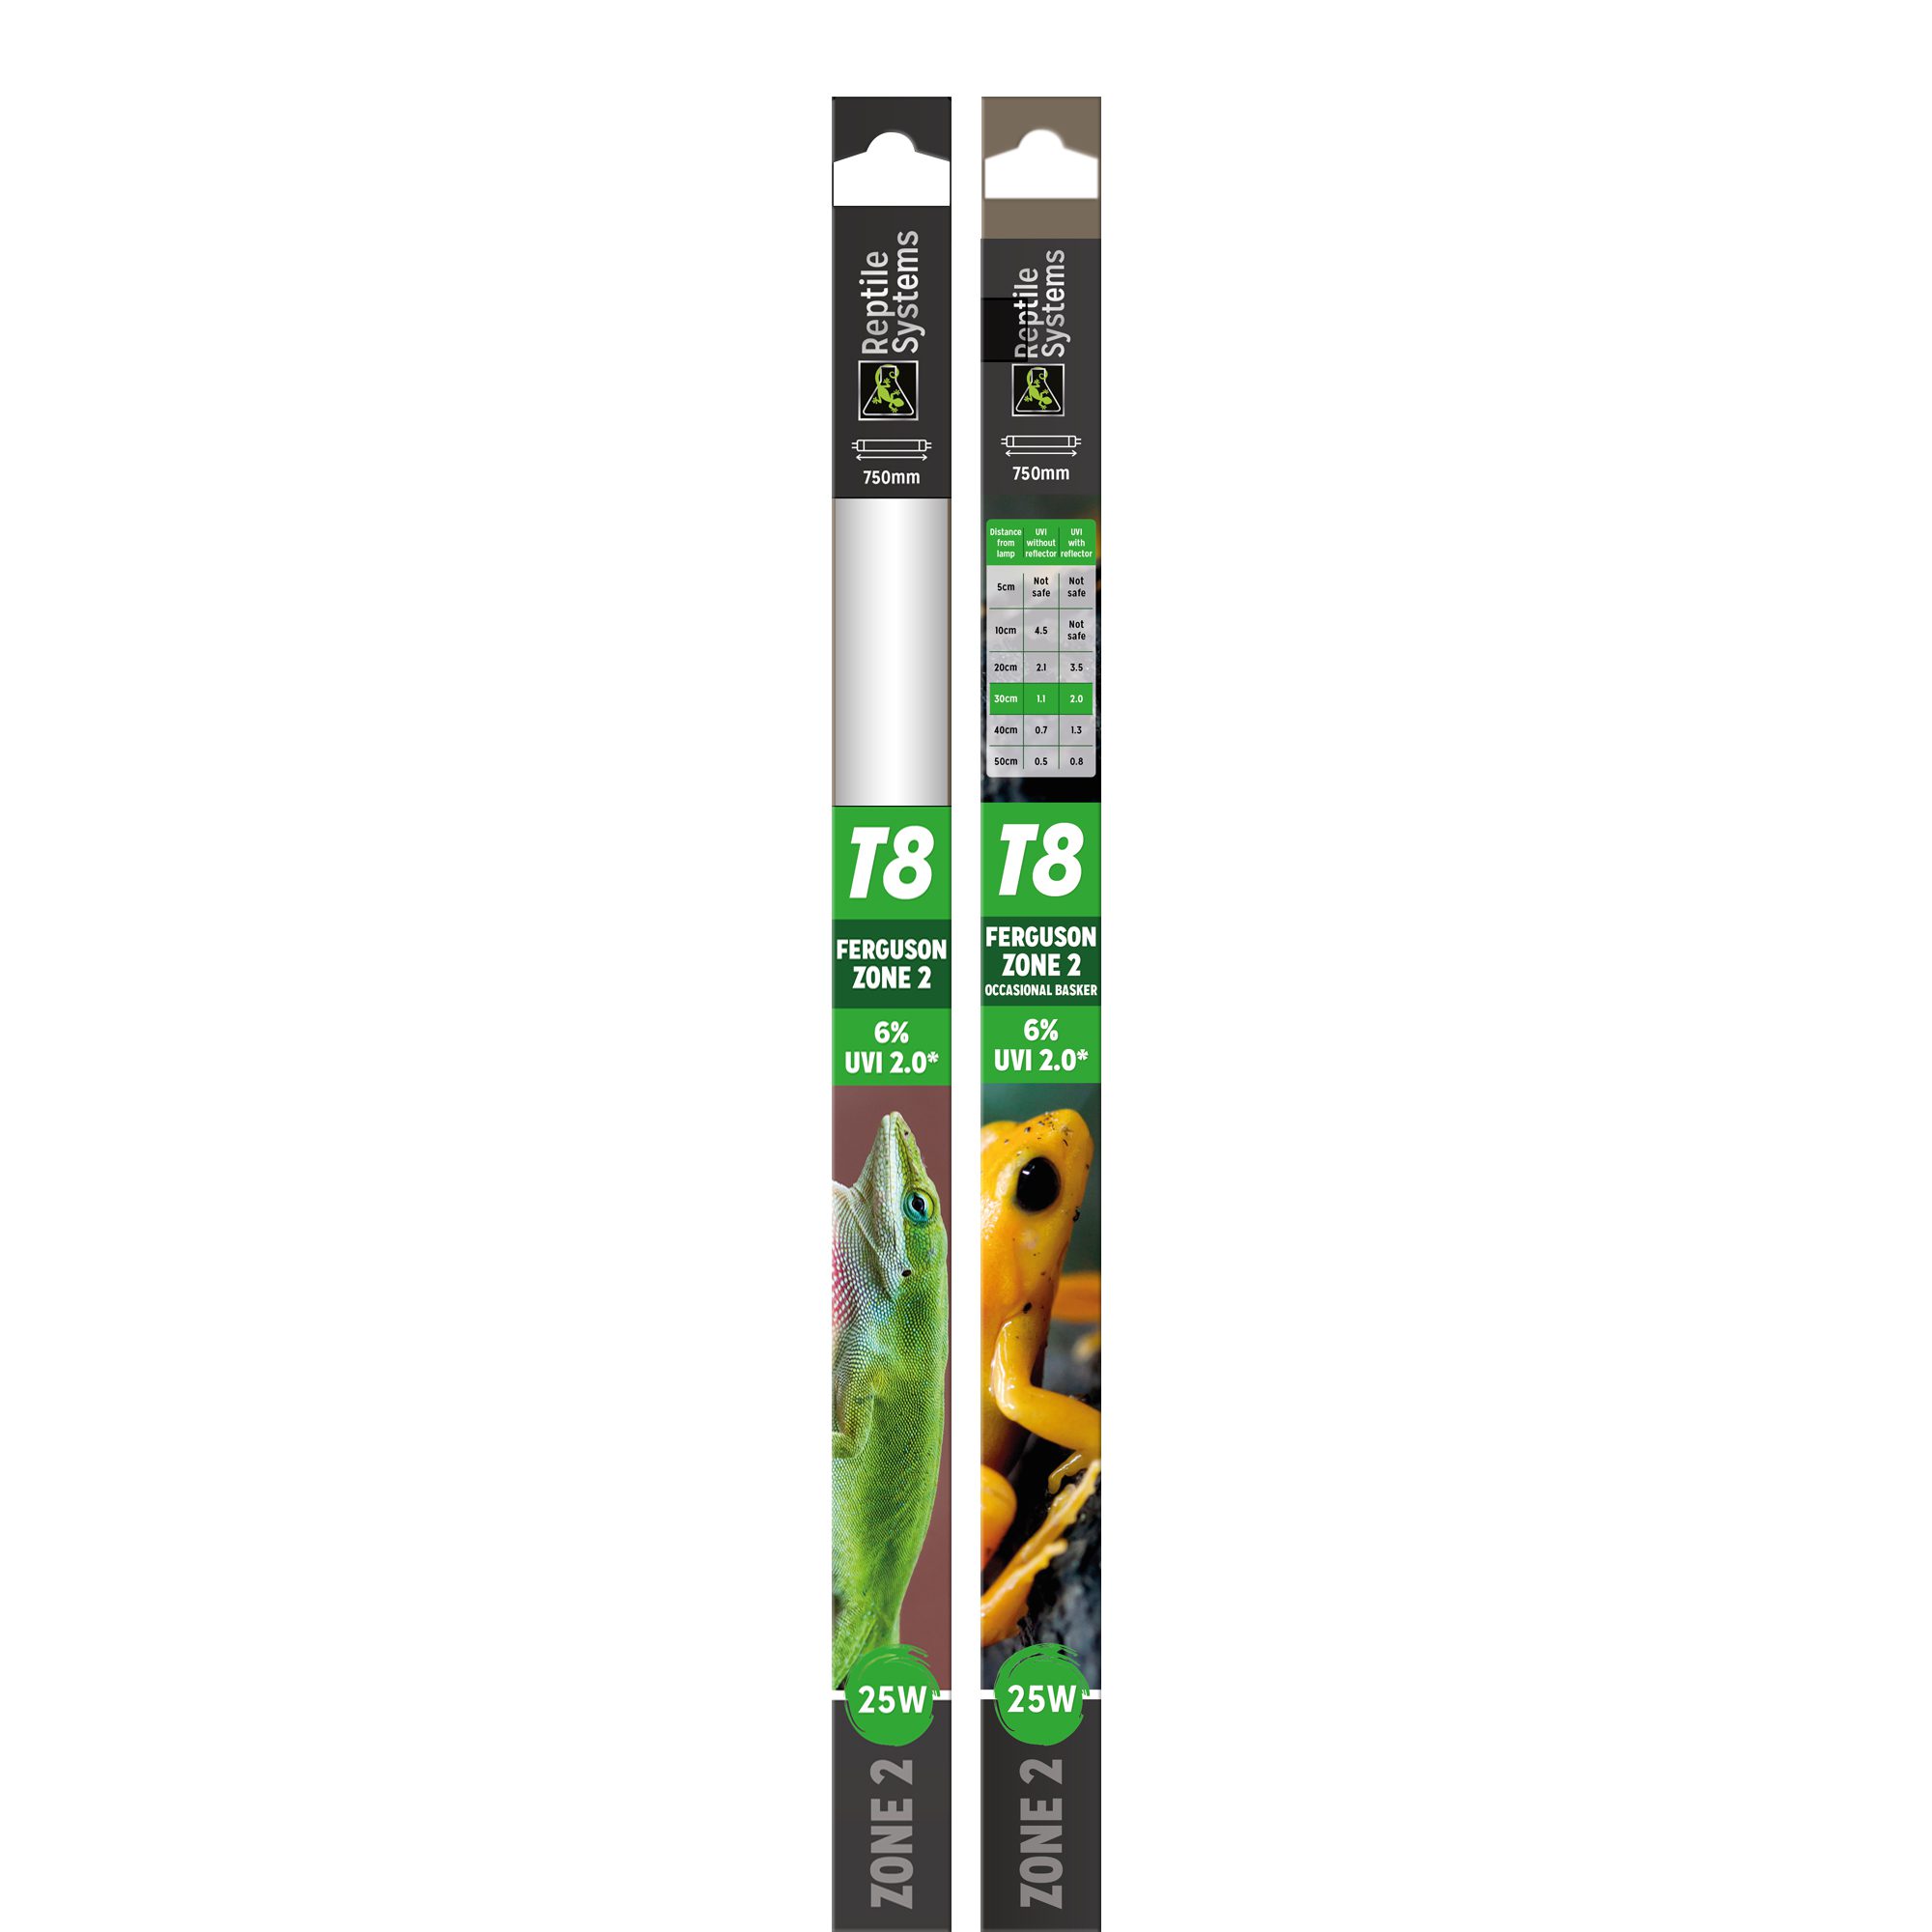 RS Zone 2 T8 750mm (30) - 25W